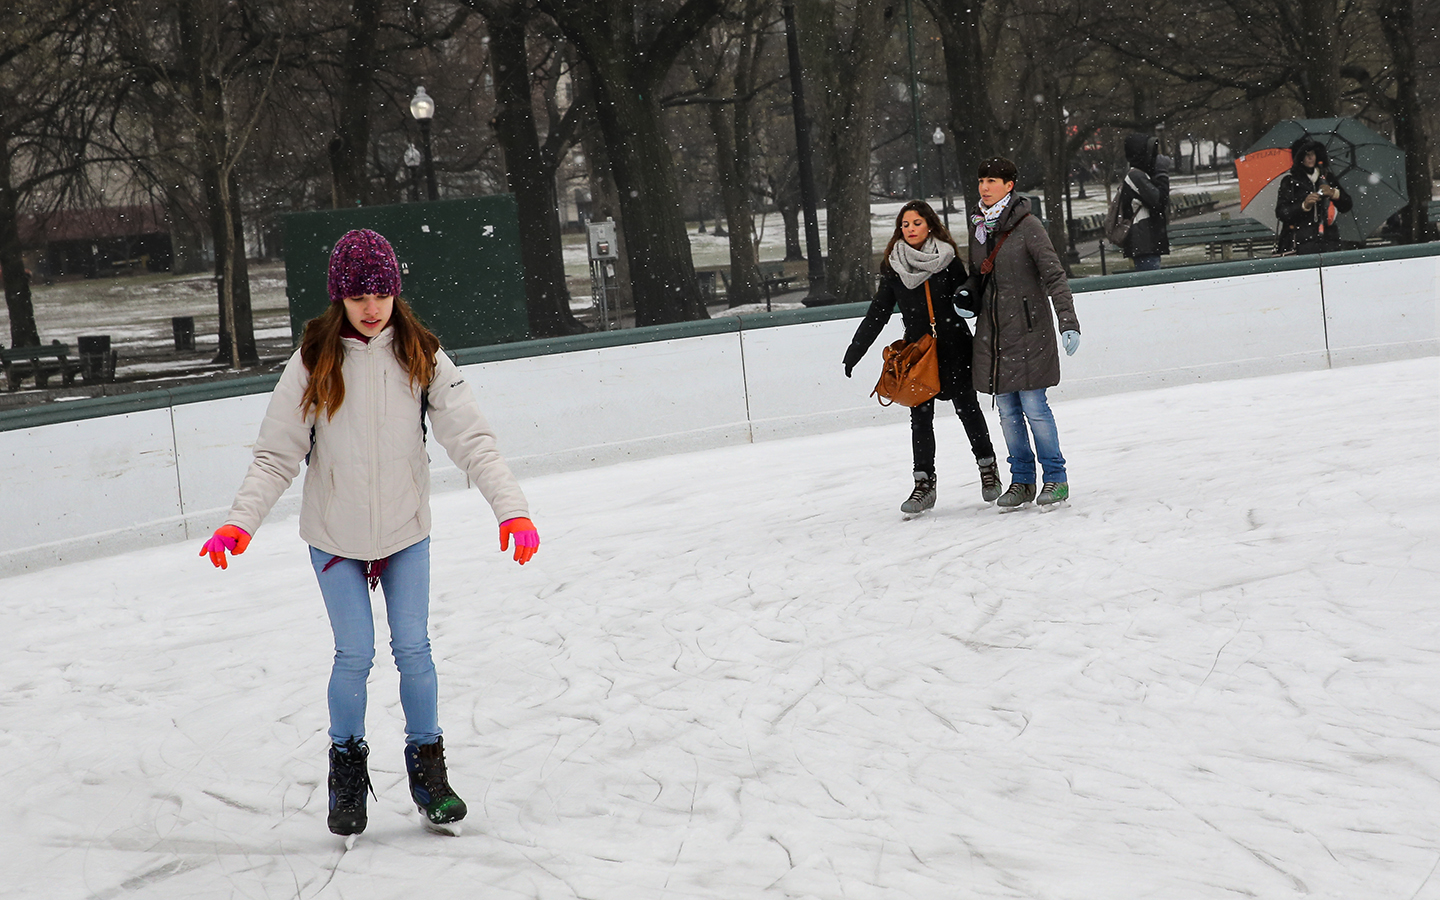 Skaters on the Boston Common Ice Rink